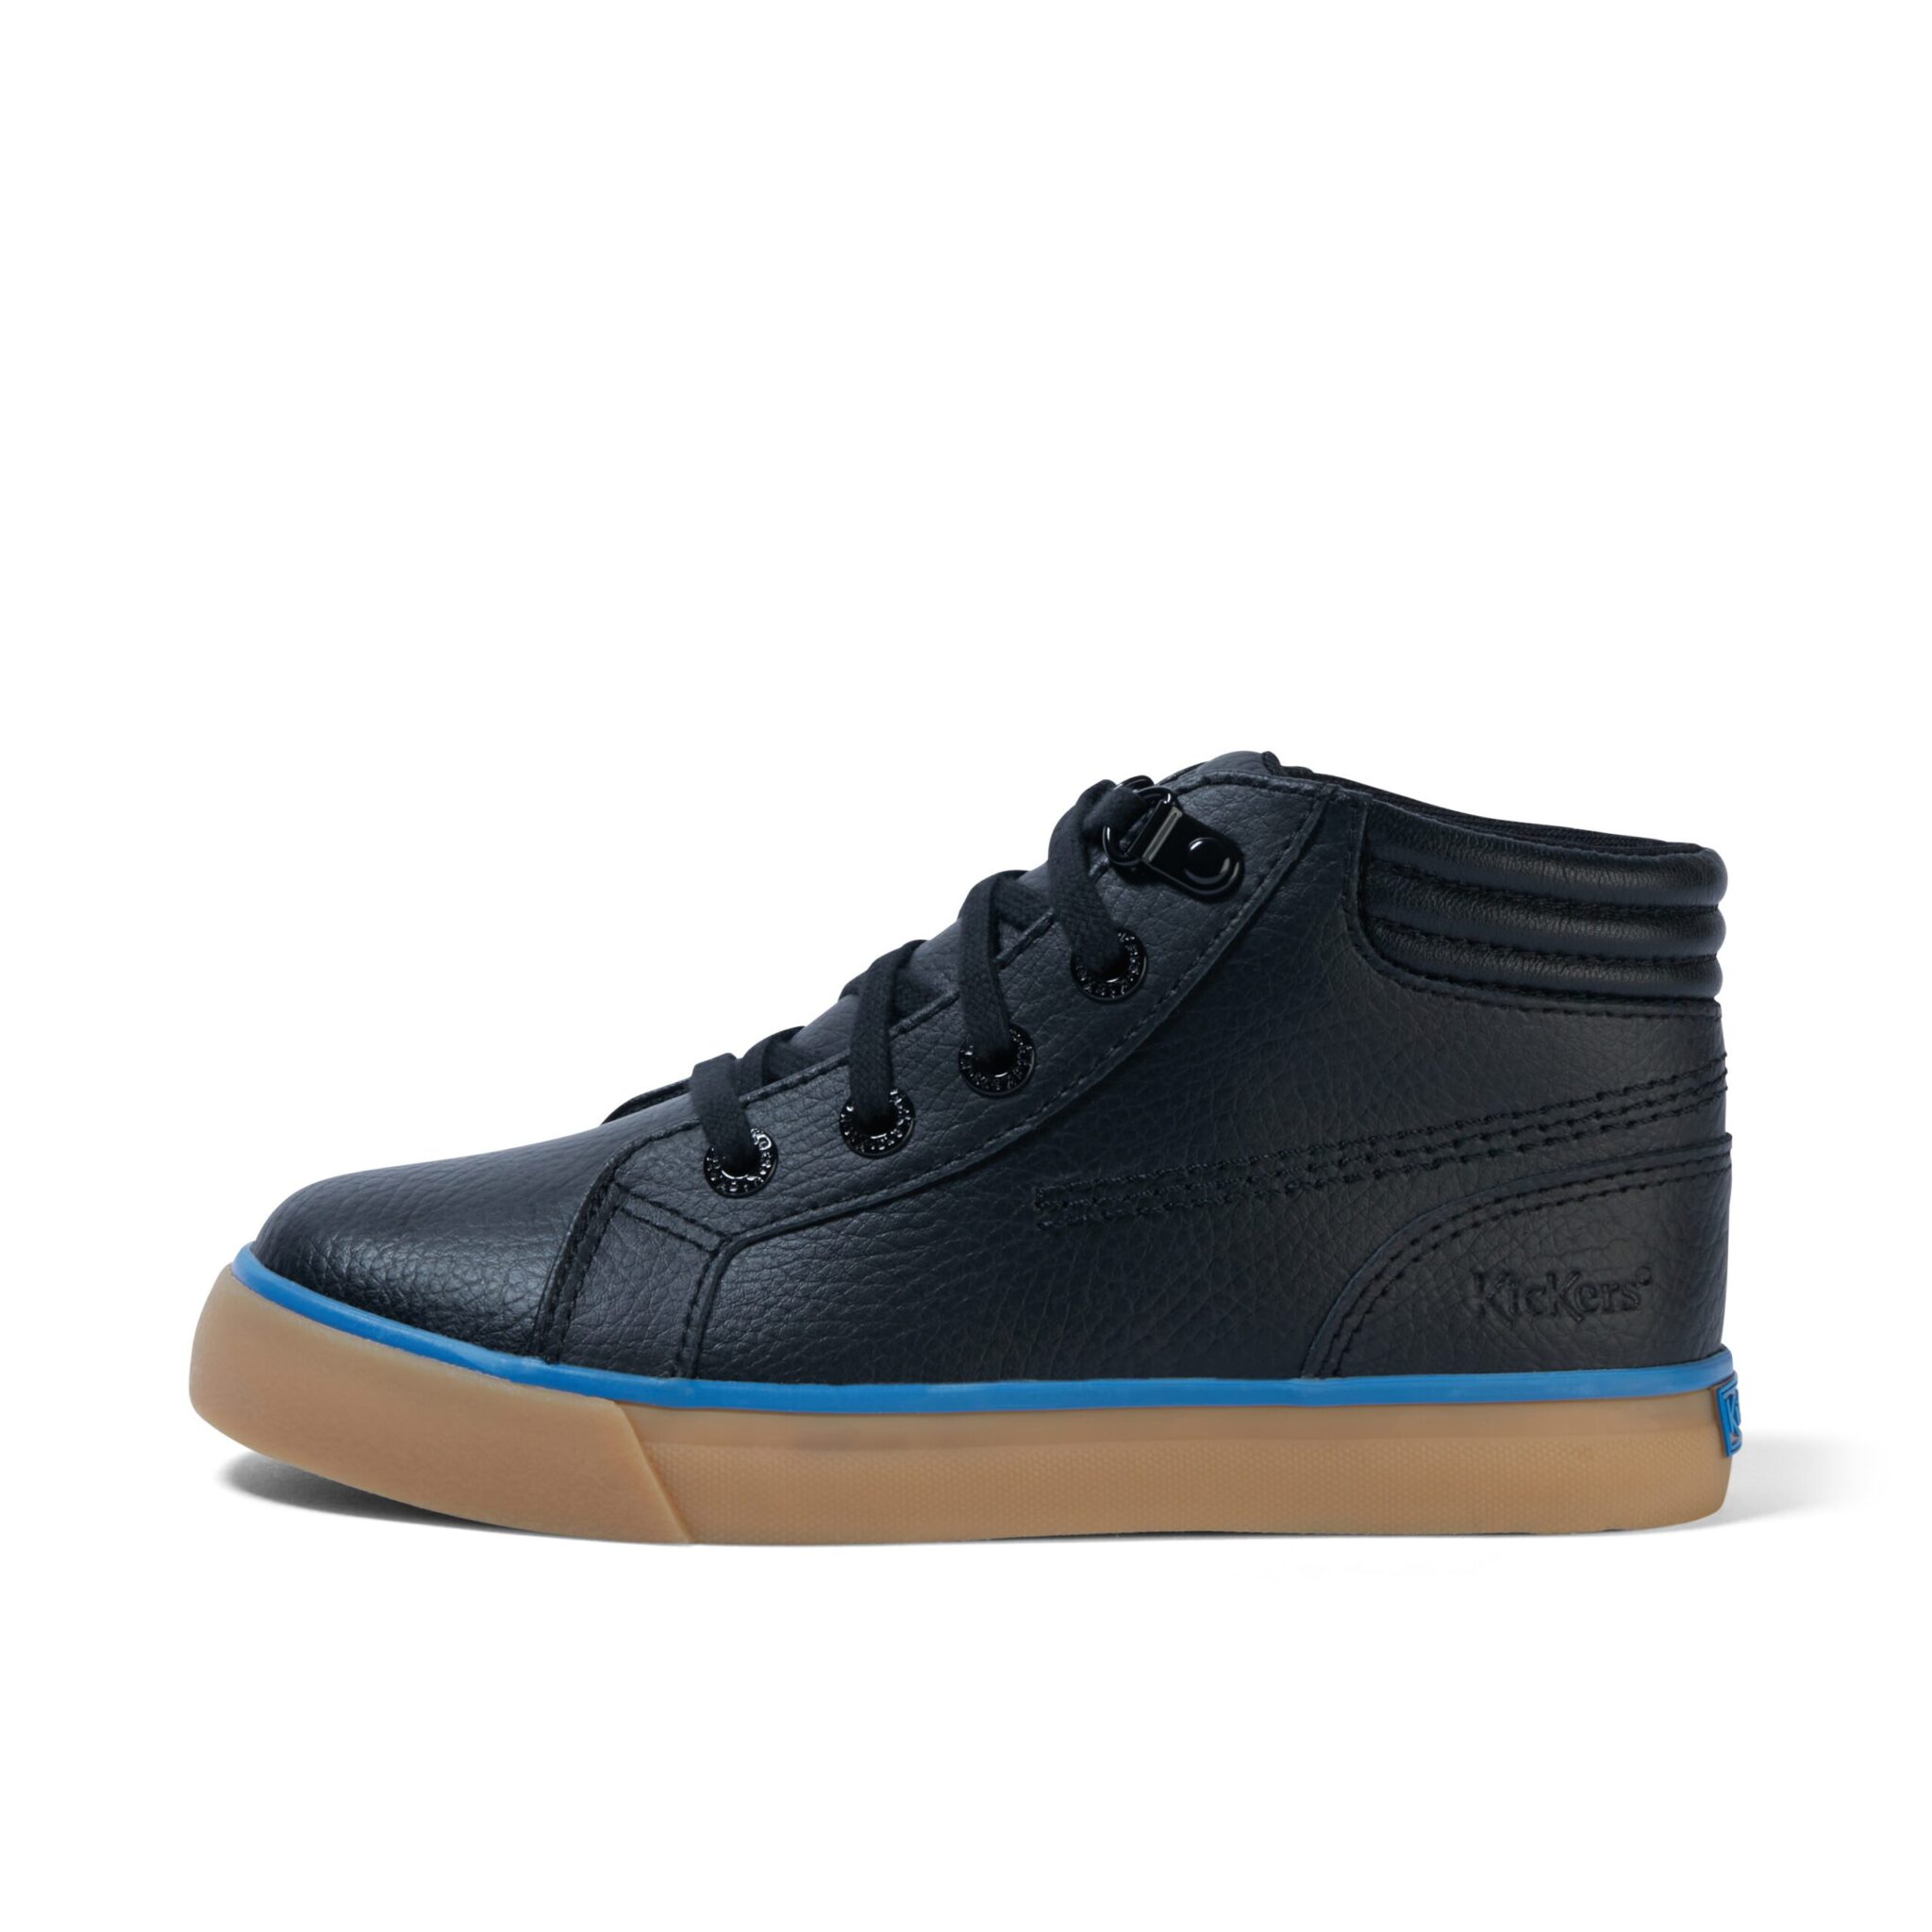 kickers boys hi top padded leather tovni shoes side view